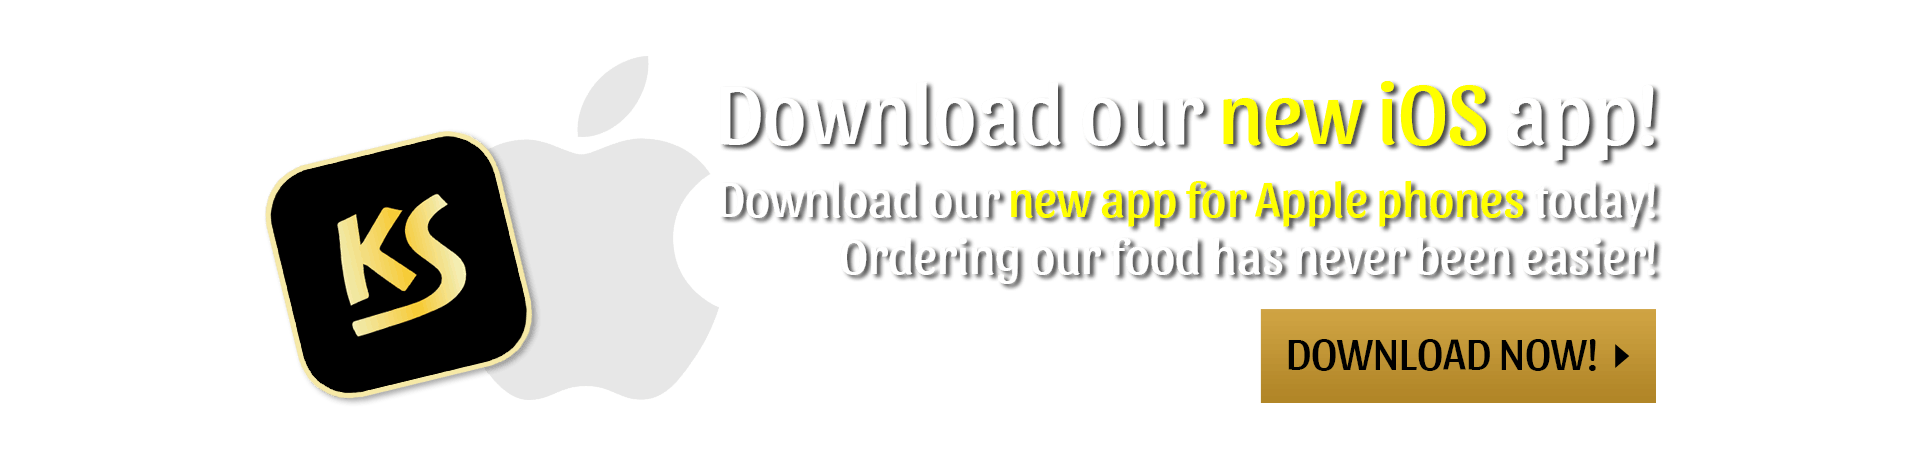 Download our new iOS app!